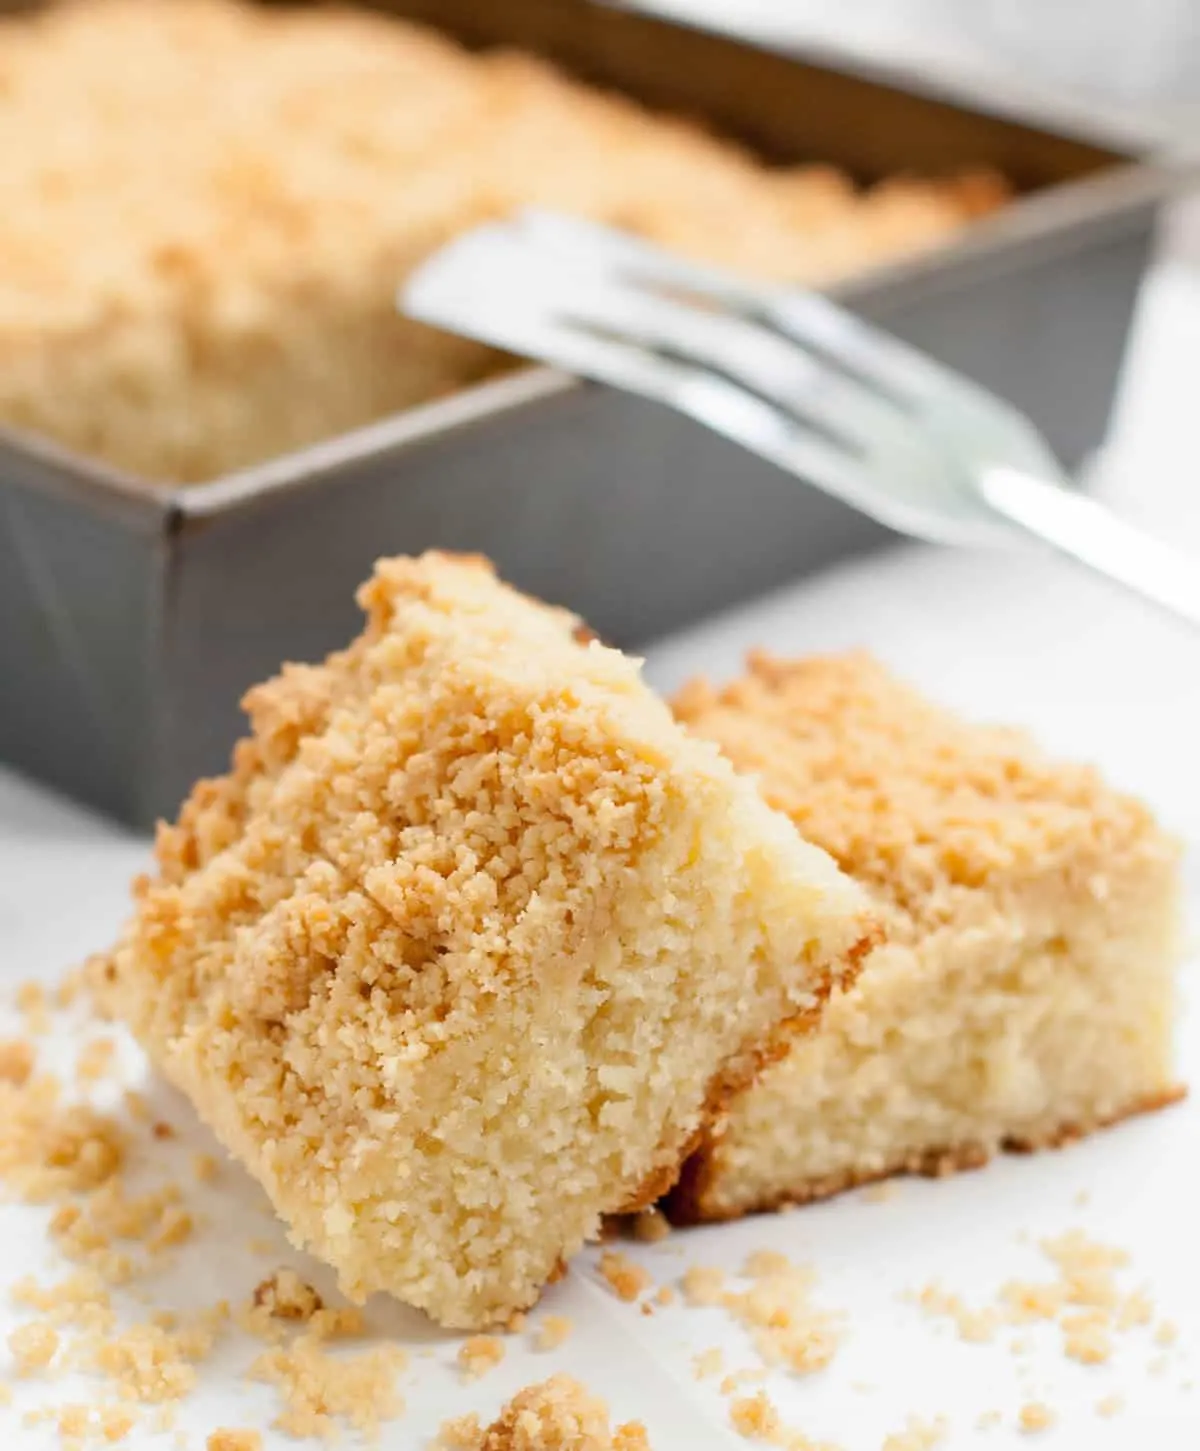 Lemon Ricotta Crumb Cake. The perfect marriage of fresh citrus and rich ricotta cheese, topped with a buttery shortbread cookie crumb topping!